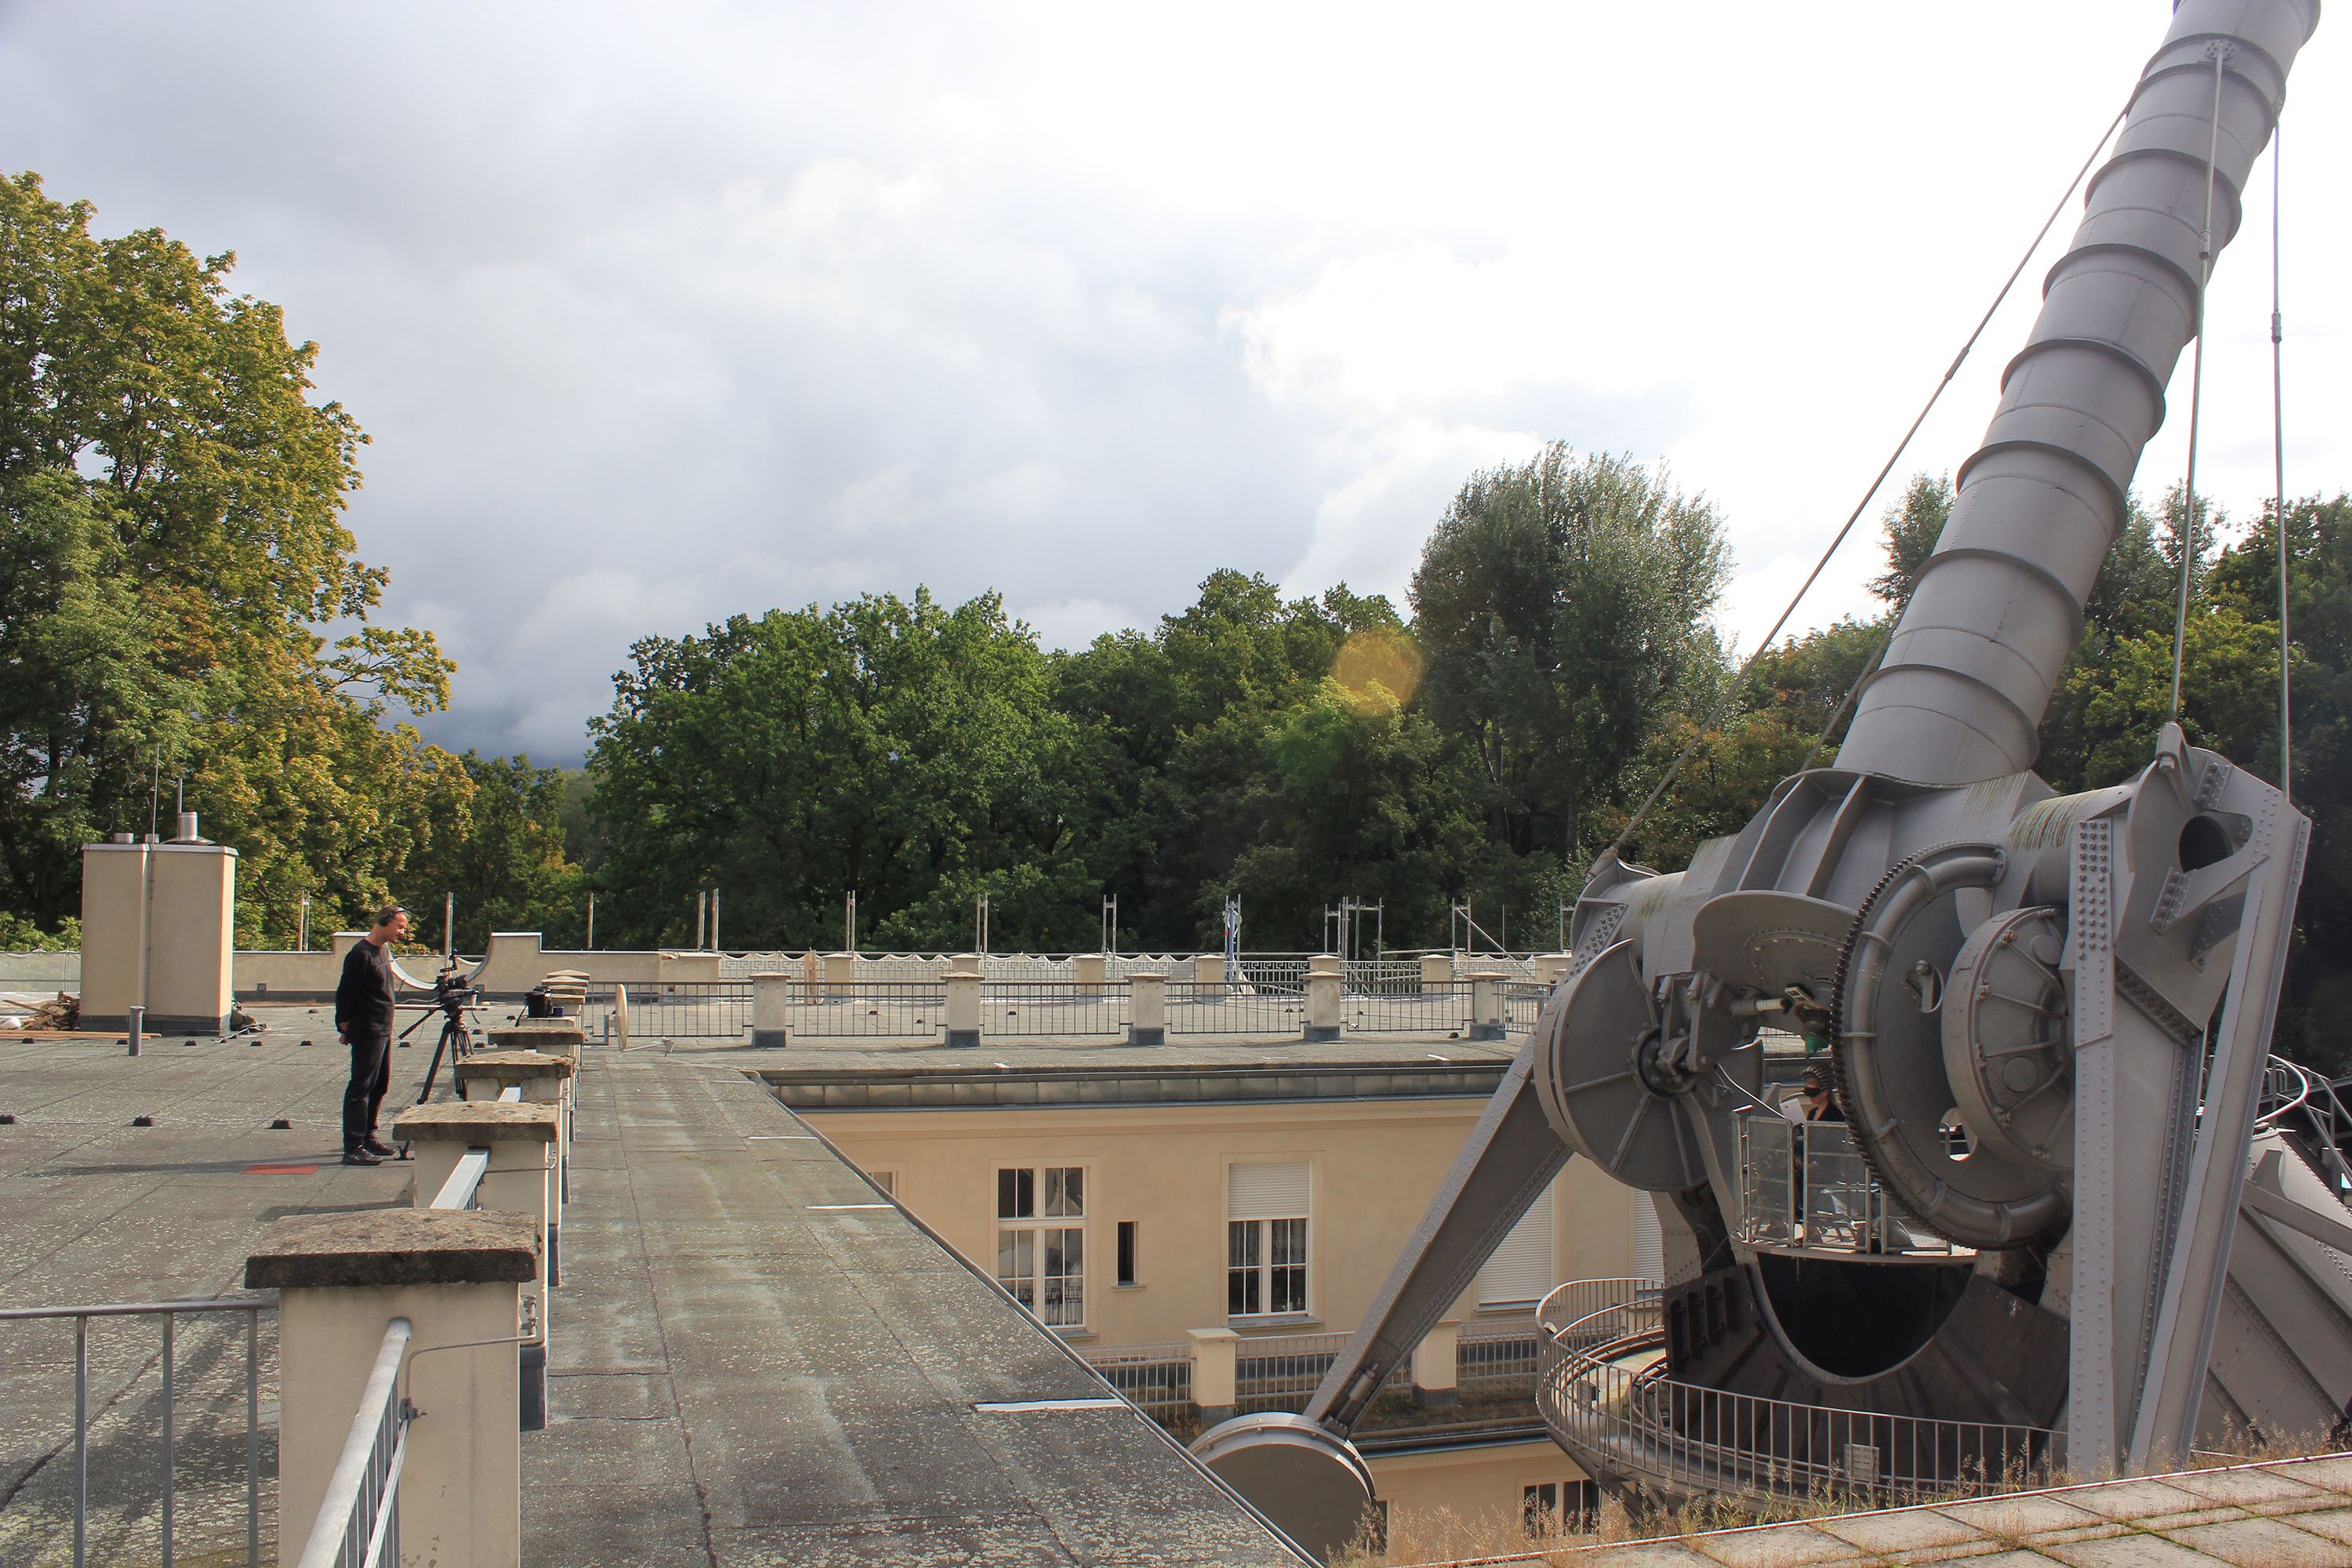 Refractor reading video shooting at Great Refractor Telescope for PPKK 07.00 by Sarah Ancelle Schoenfeld and Louis-Philippe Scouraras at Archenhold Observatory Berlin